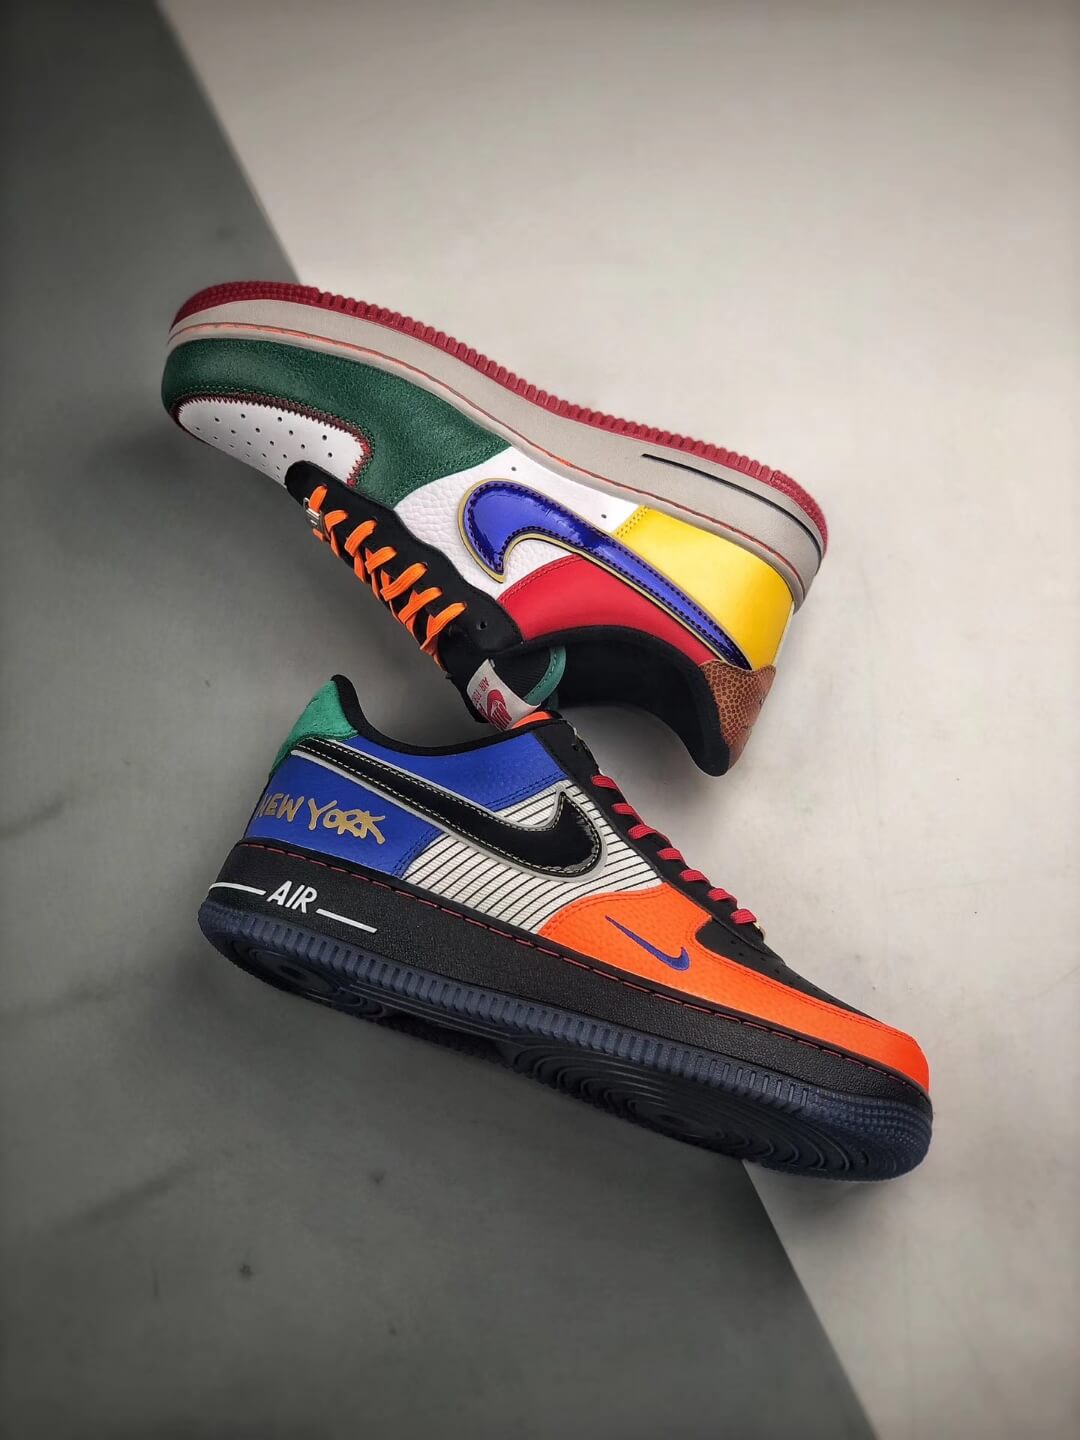 what the new york af1